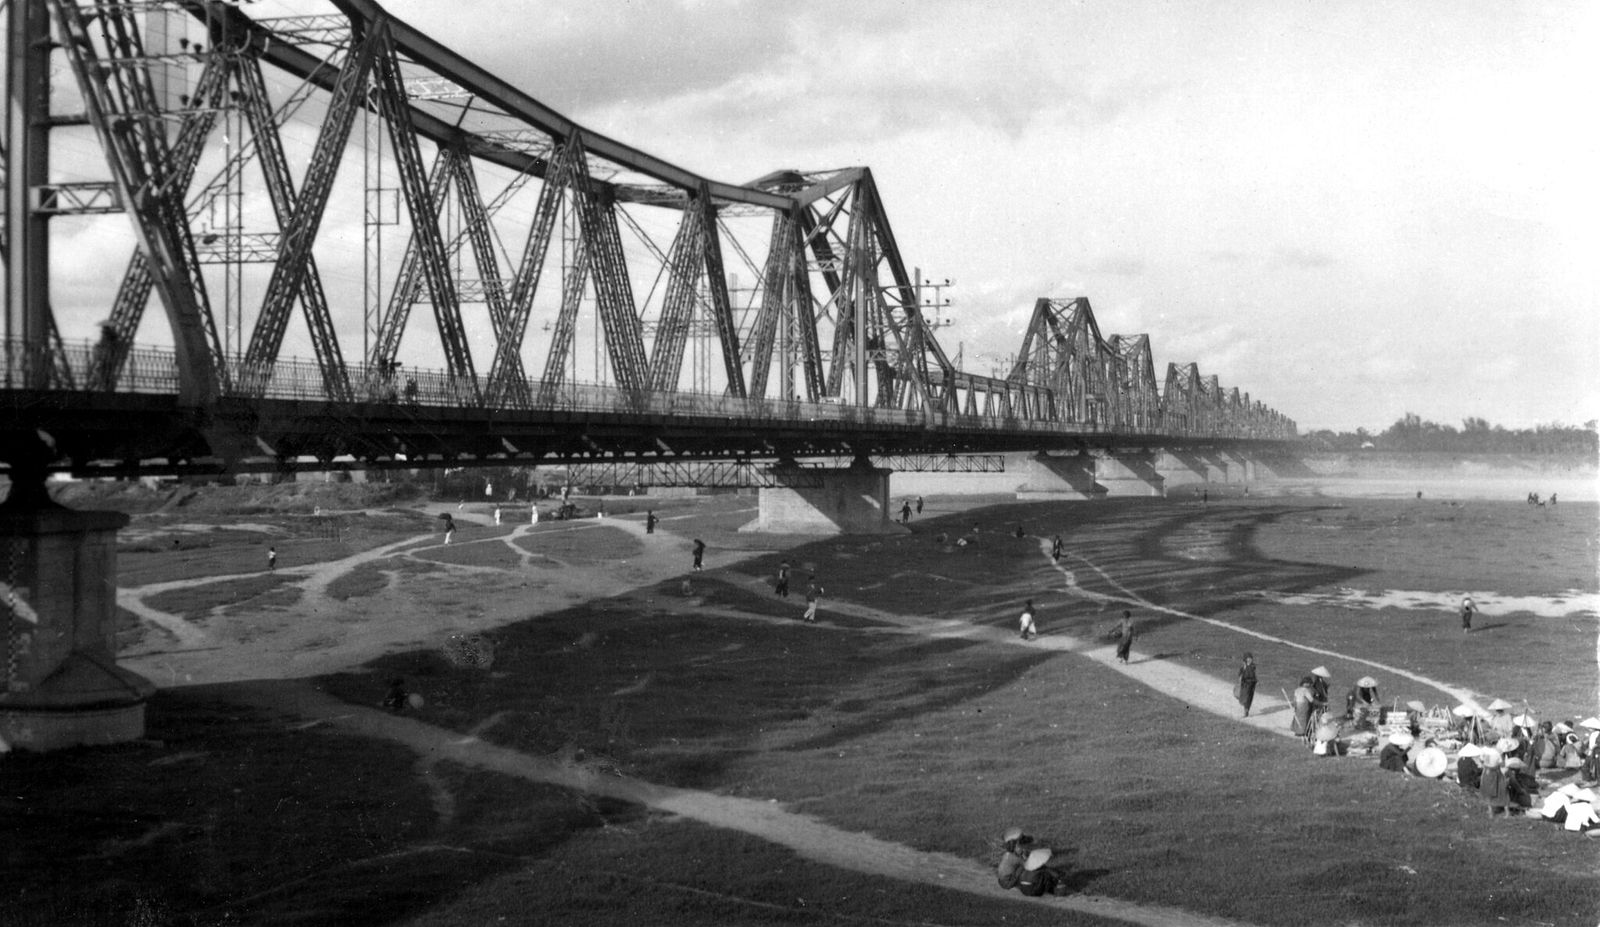 Kết quả hình ảnh cho [Photos] Monochrome Images Capture the Calmness of the Capital in 1939 Monday, 07 October 2019. Written by Urbanist Hanoi